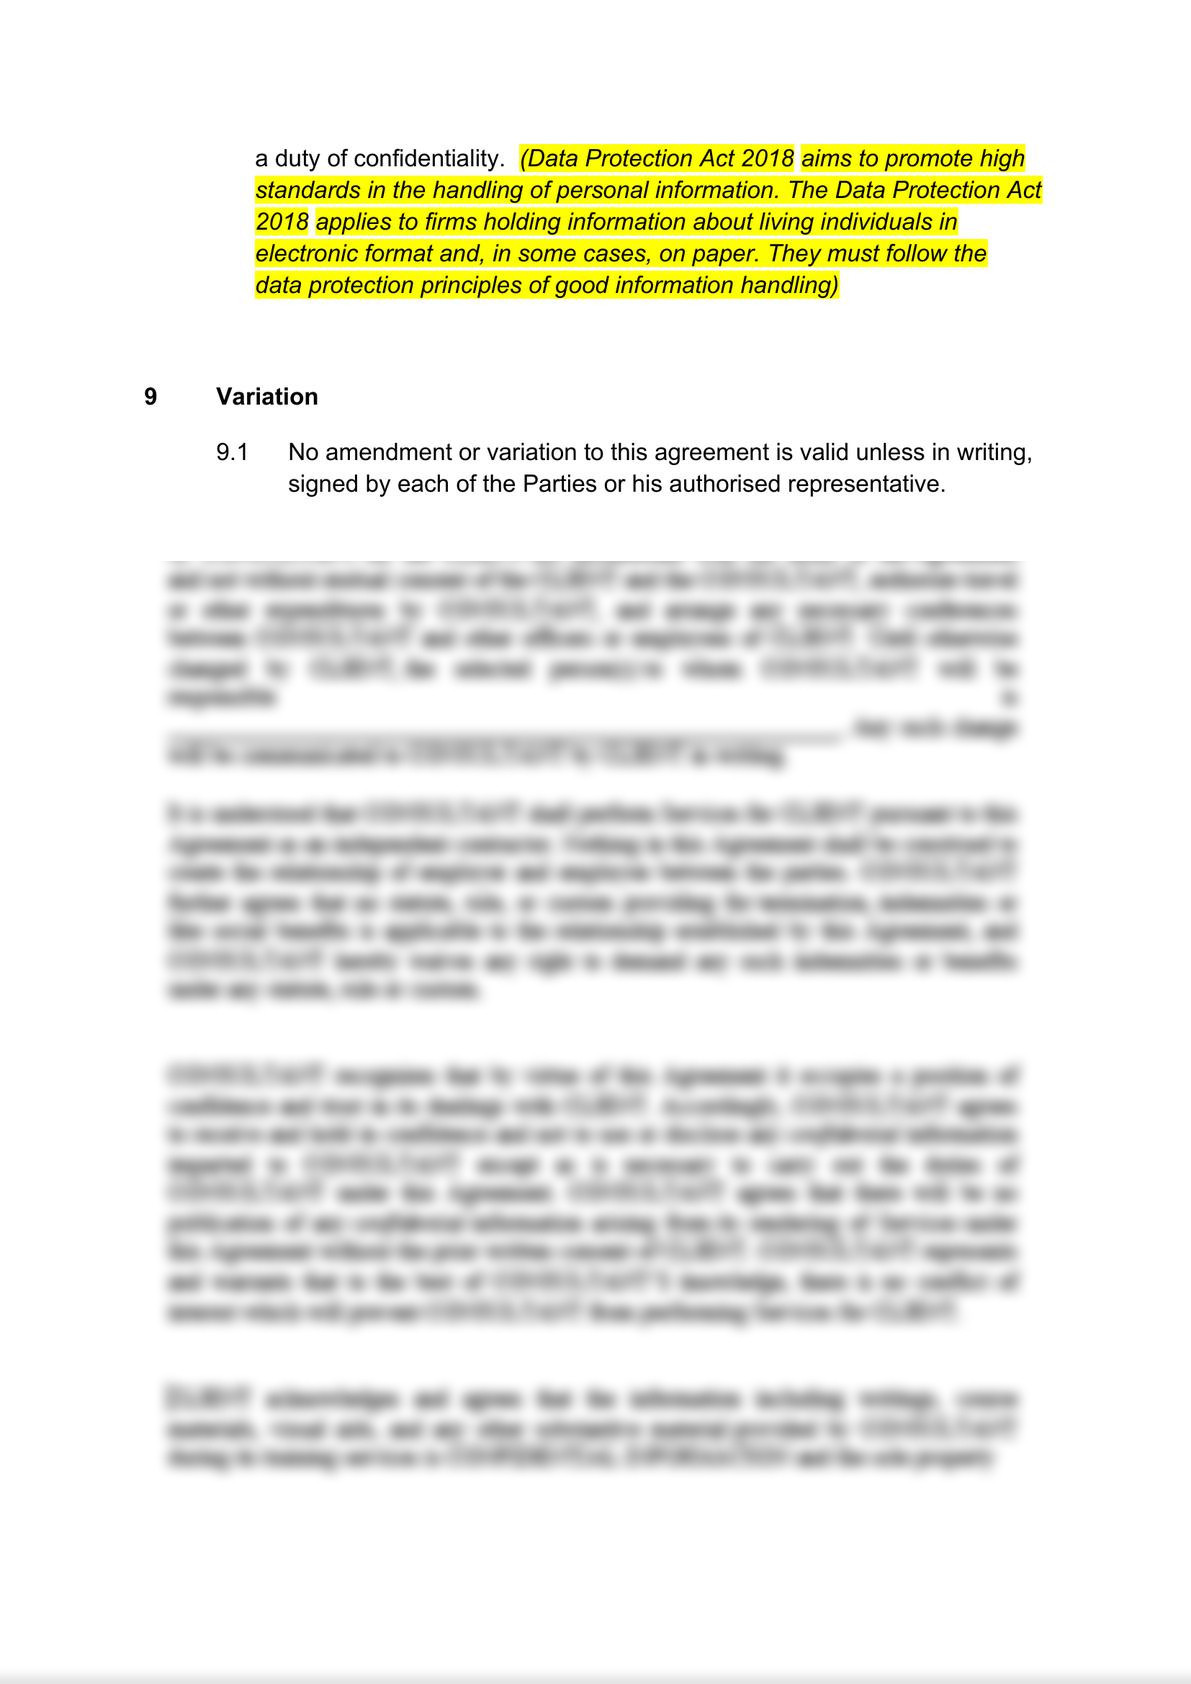 Employment agency agreement: client's version-4